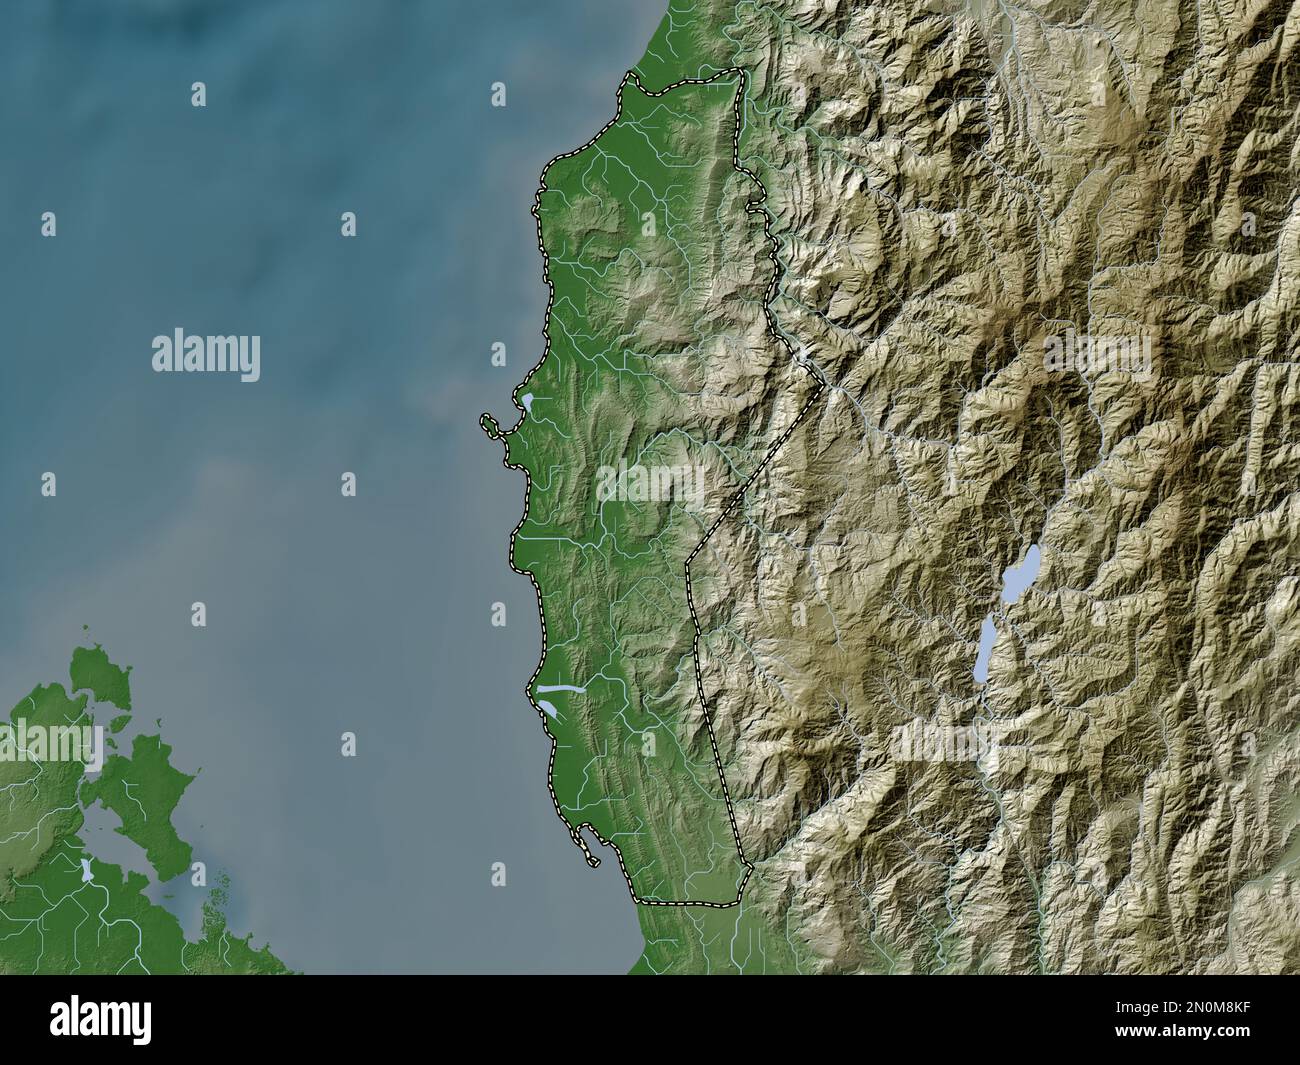 La Union, province of Philippines. Elevation map colored in wiki style with lakes and rivers Stock Photo